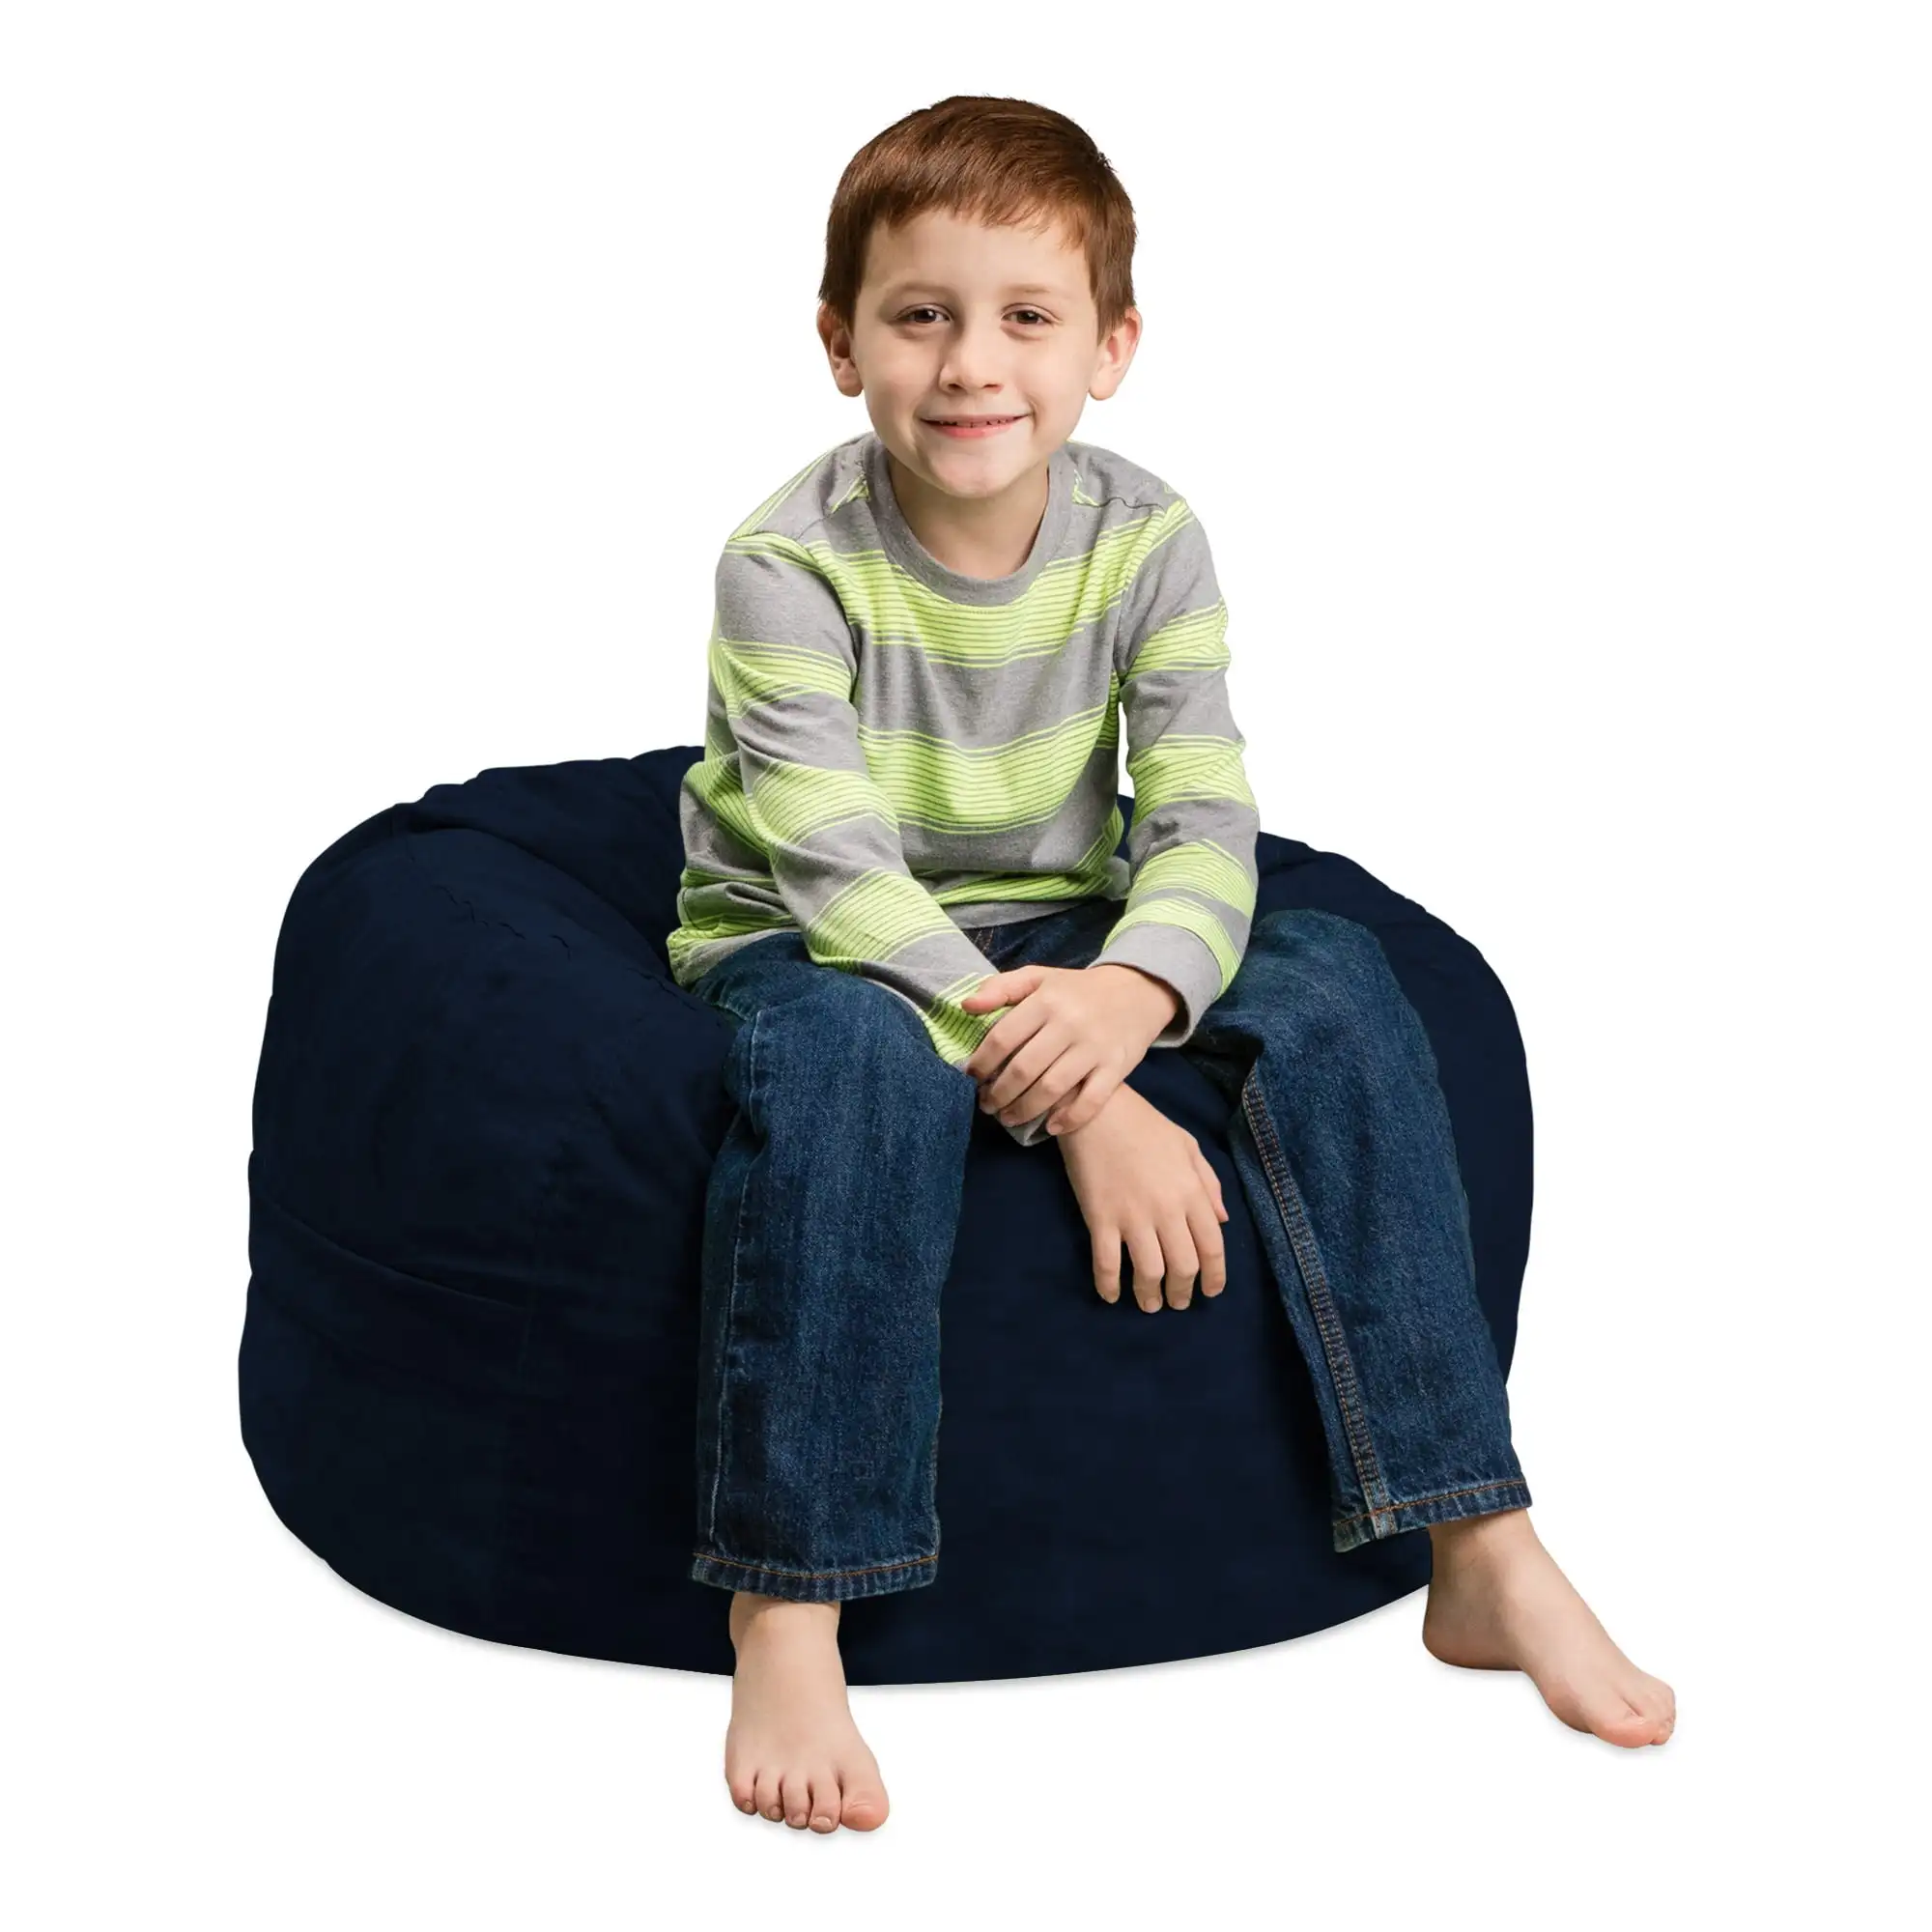 

Memory Foam Bean Bag Chair, Lounger Round Fluffy Couch Cozy BeanBag Chairs with Microsuede Cover, Kids, 2 ft, Navy